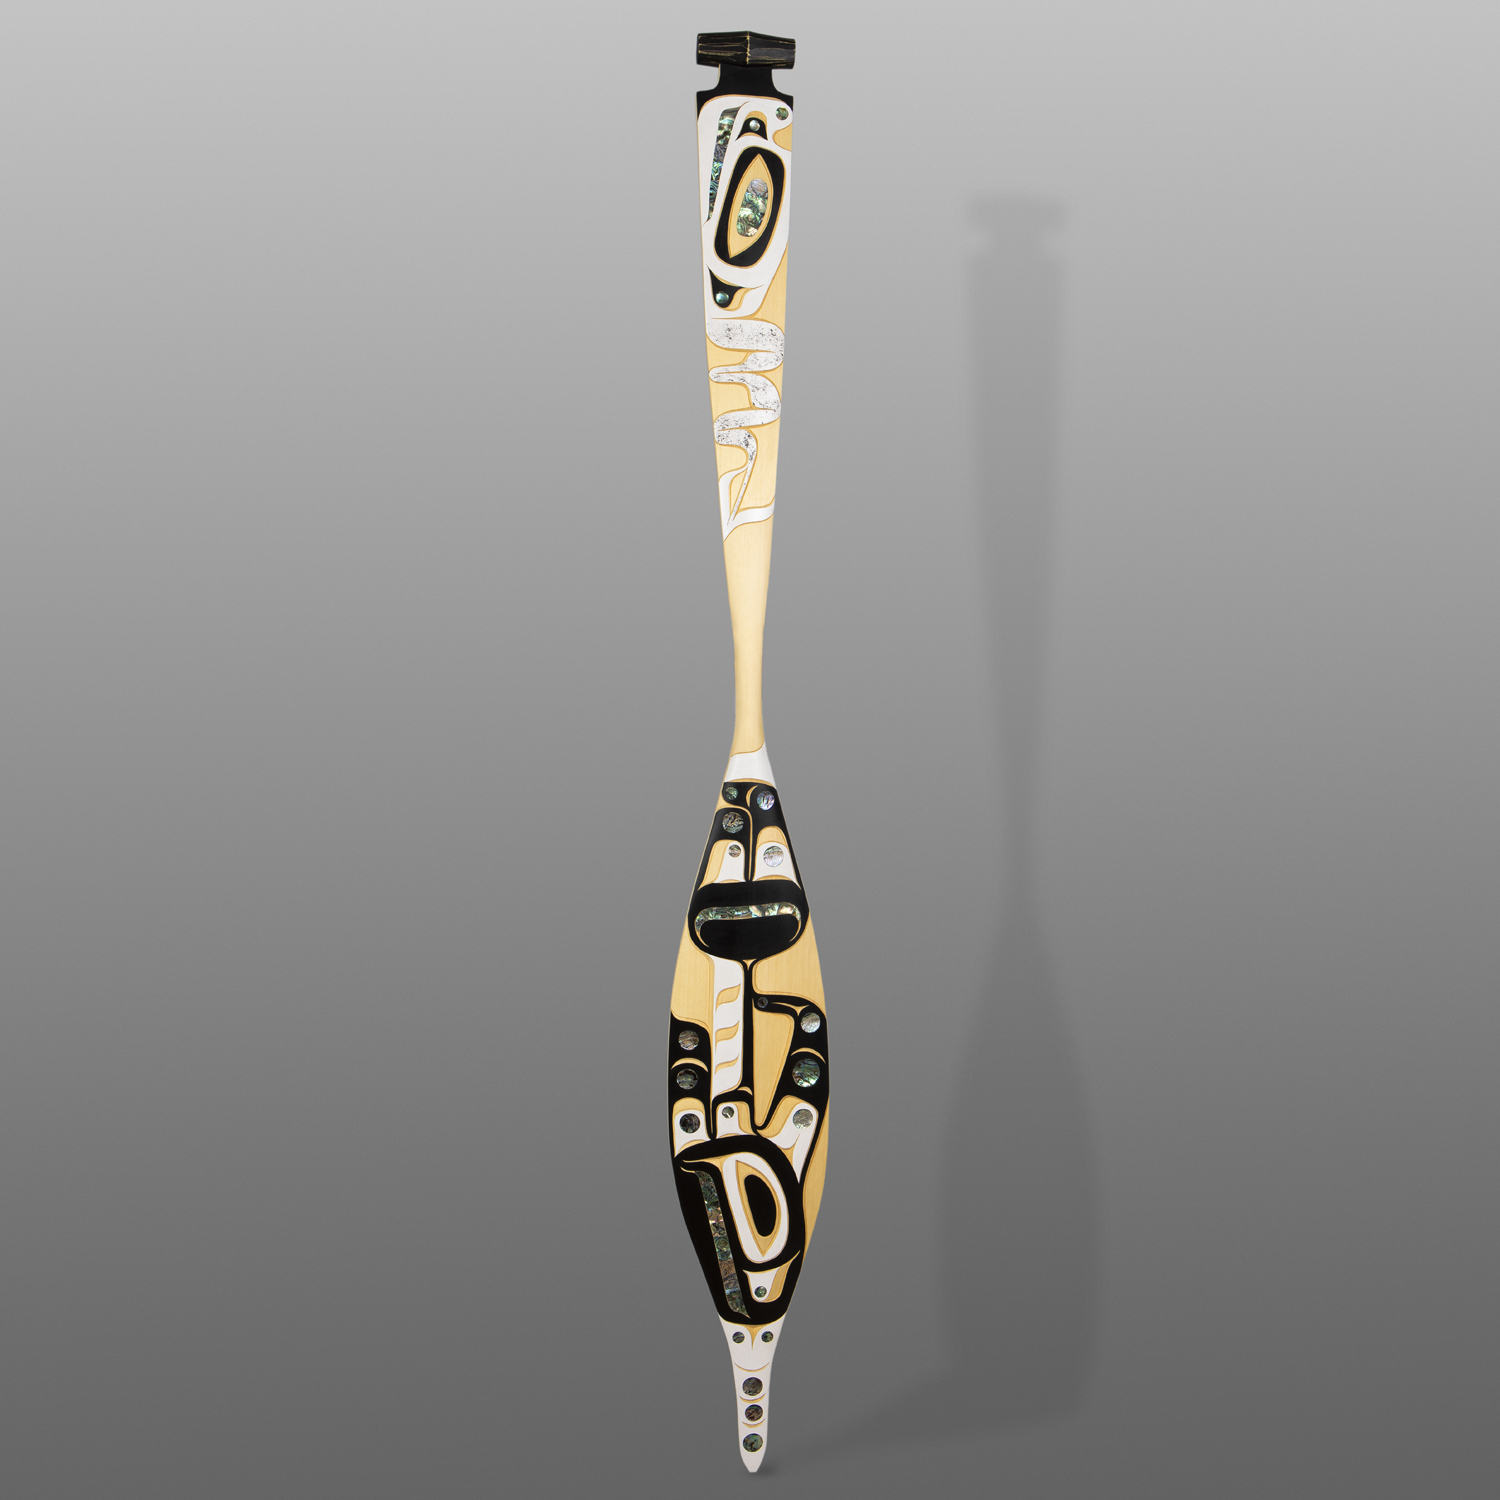 Orca & Sea Serpent
Moy Sutherland
Nuu-Chaa-Nulth
Yellow cedar, abalone, paint
68¾  x 7¾
$5600
Paddle Show 2024